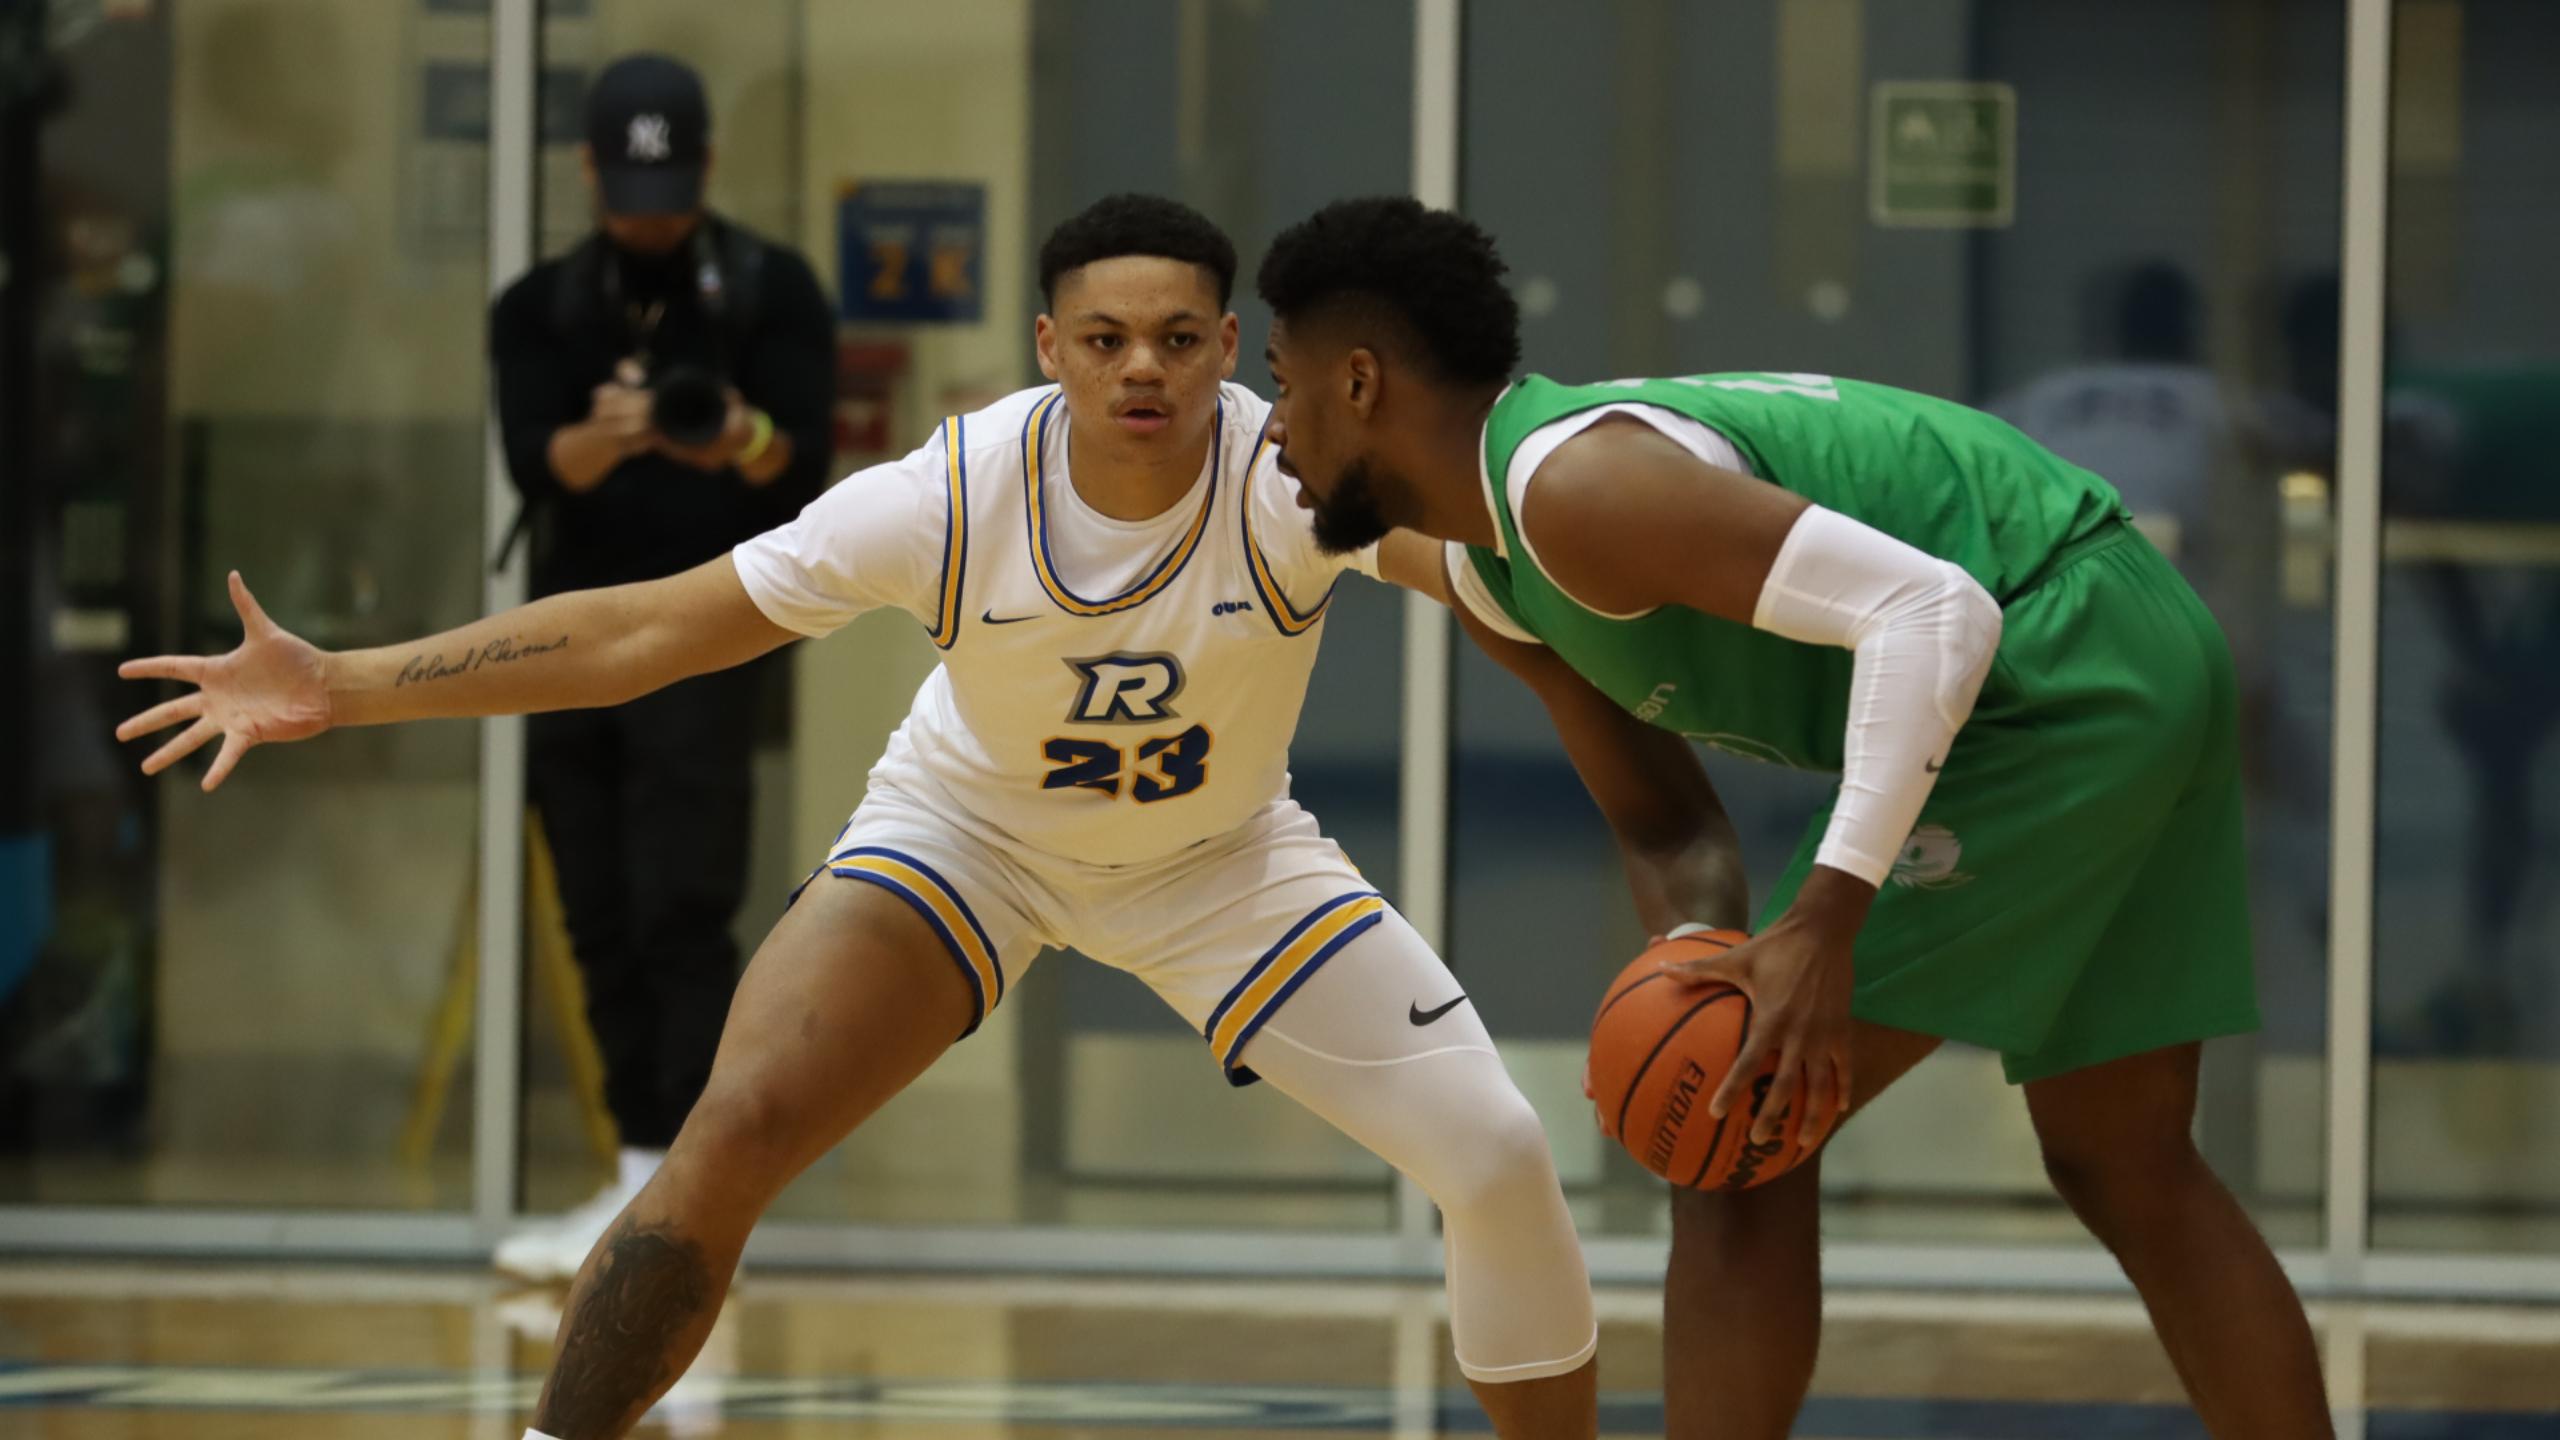 A TMU men's basketball player in a white jersey plays defence against an Oregon player in a green jersey